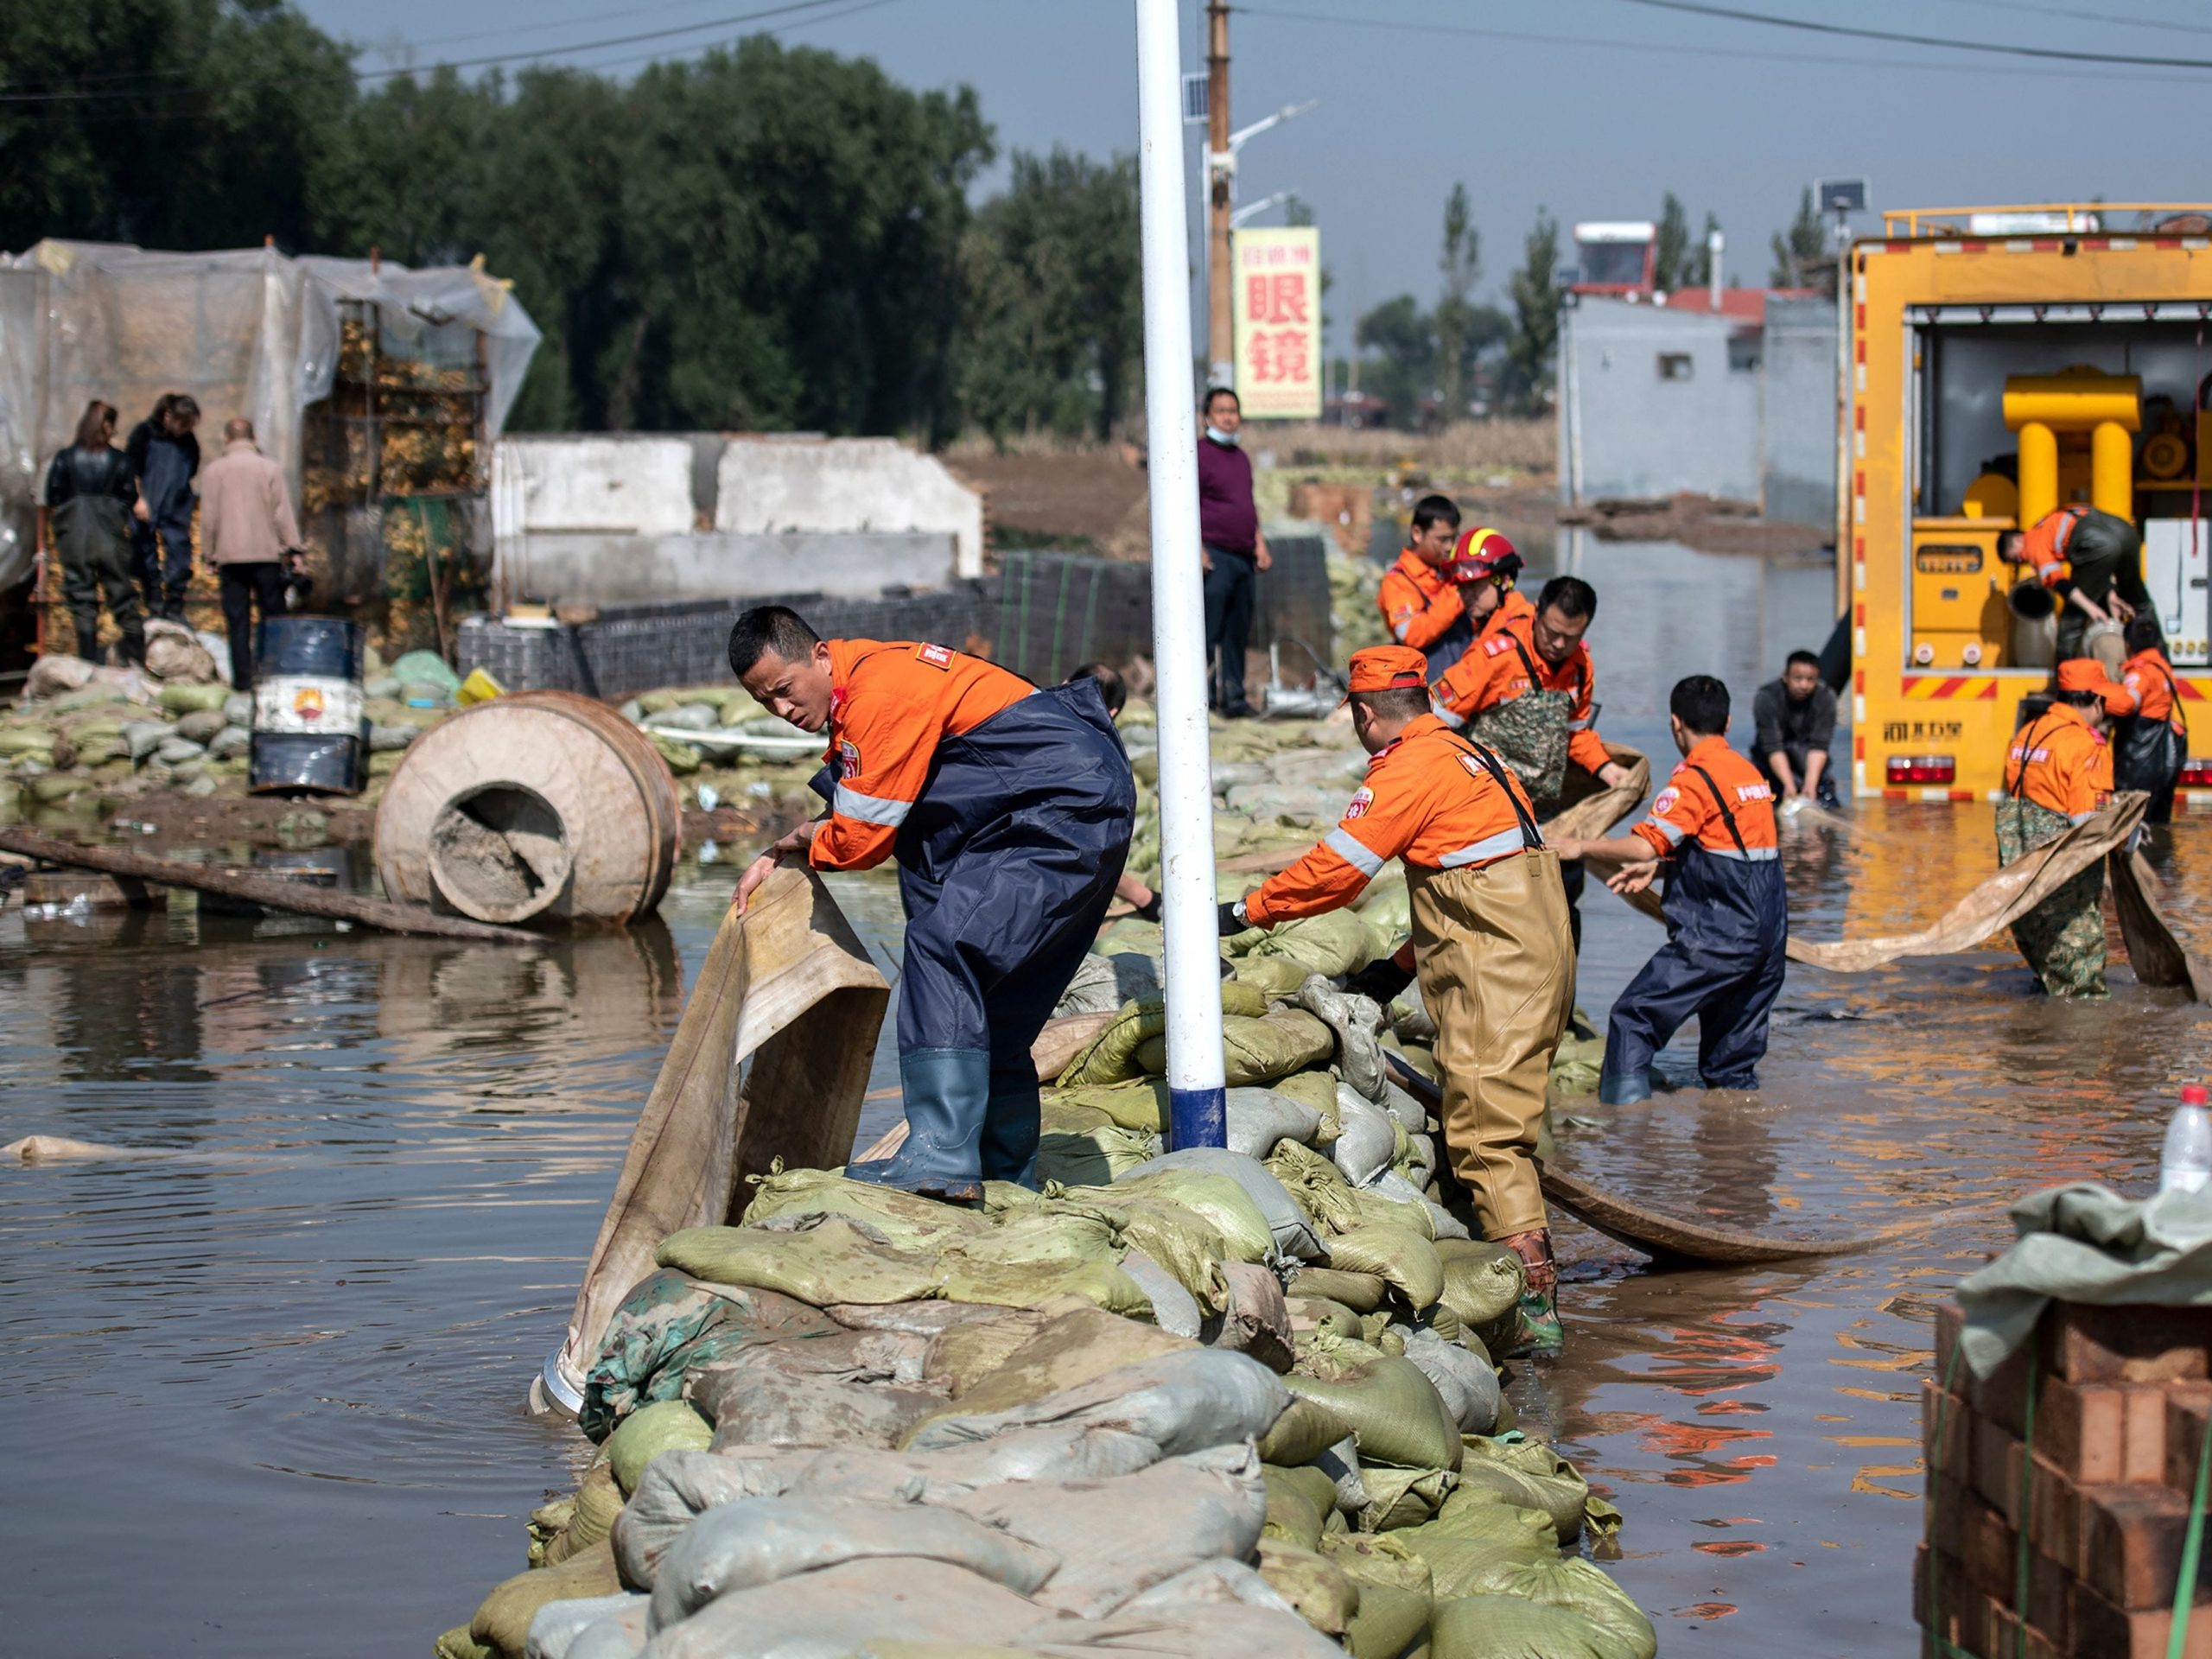 Rescue workers working at a flood in China, Shanxi province.